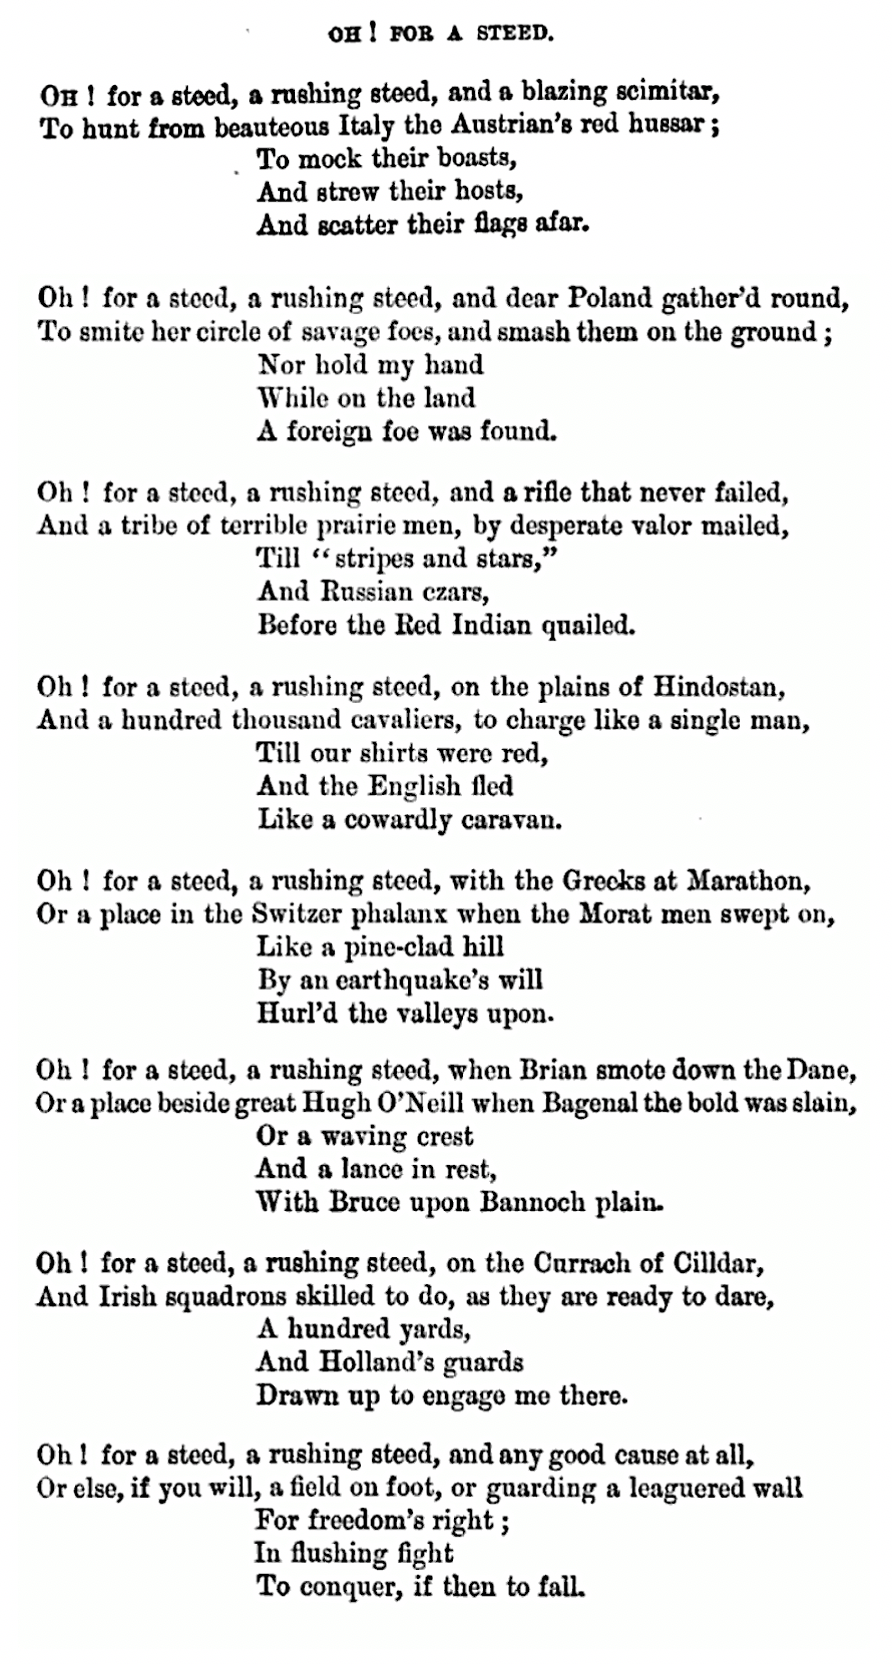 Thomas Davies, "Oh! For a Steed"